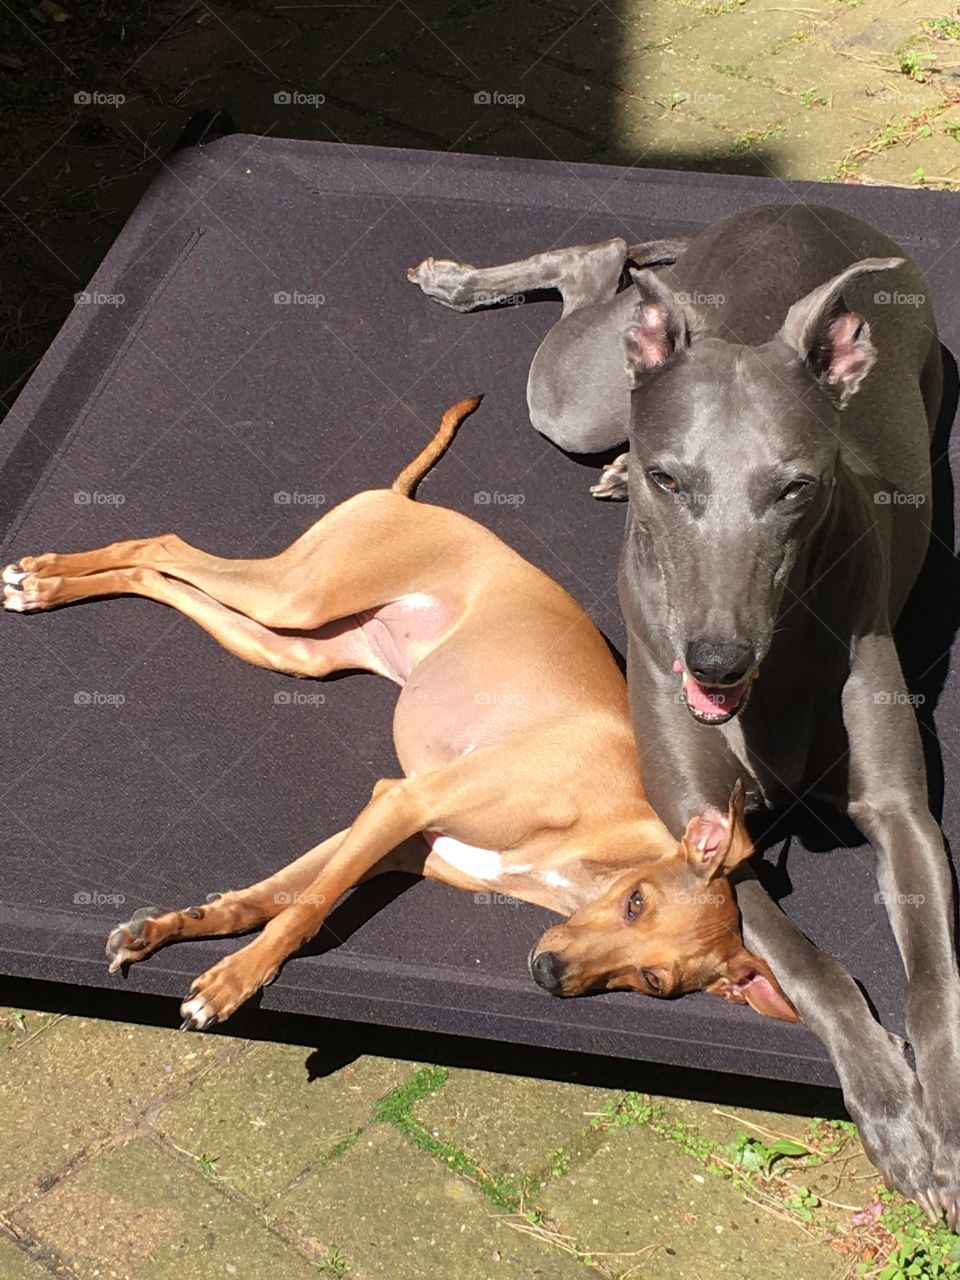 Amber the Italian greyhound puppy and Libby the whippet relaxing in the garden together in the summer sun 